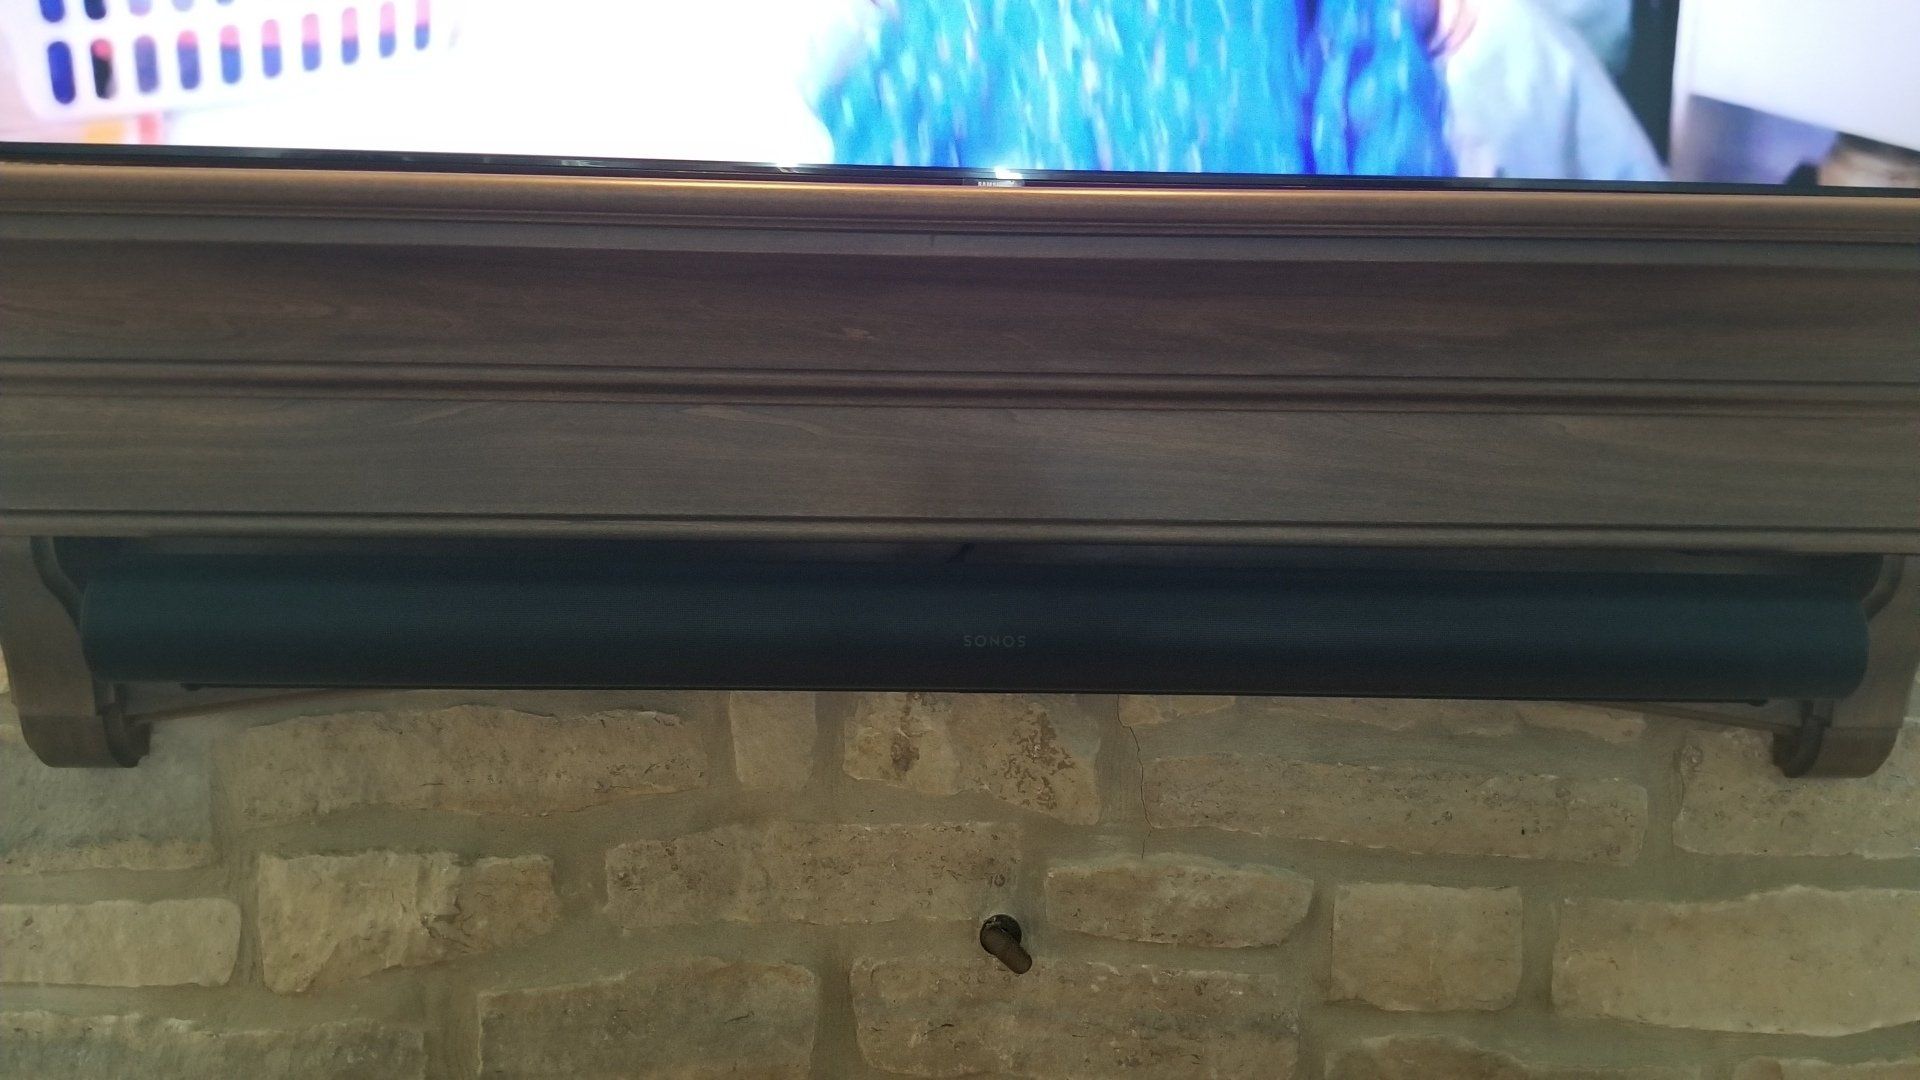 a tv is mounted on a mantle above a brick wall with a sonos arc custom mounted on the front of the mantle by fisher electronics in northern ohio